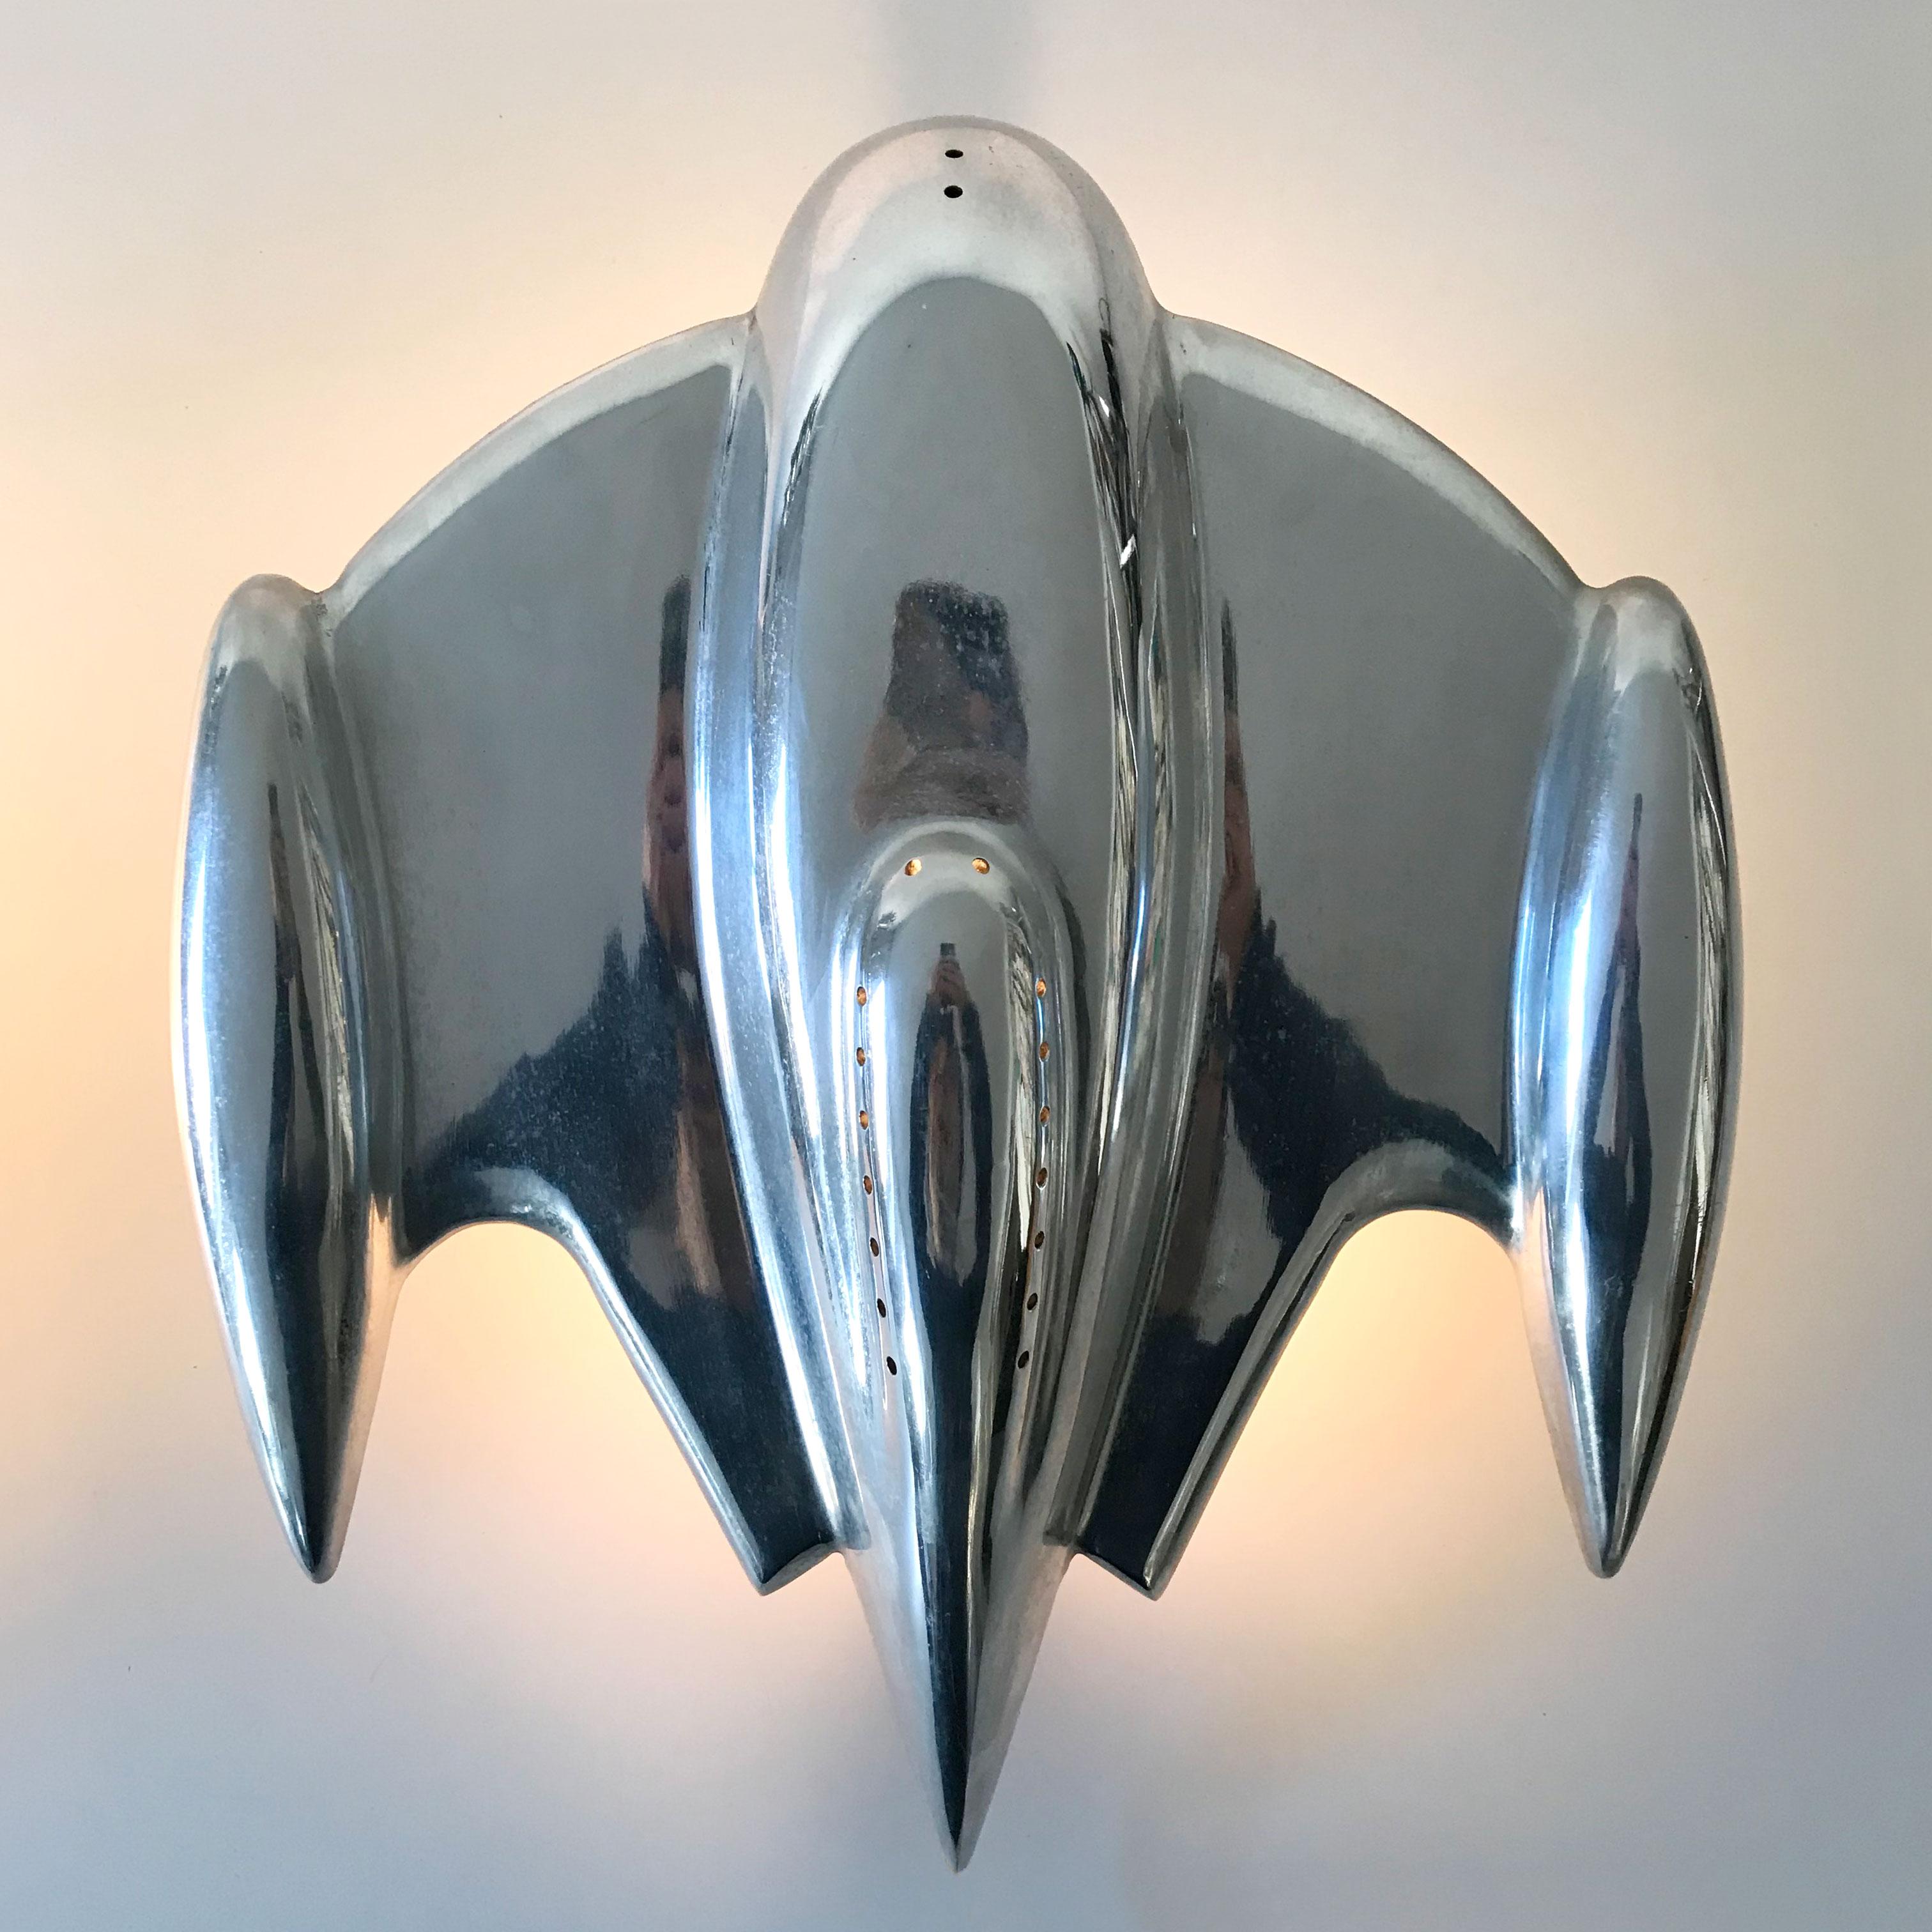 Set of 2 Large Sputnik Spaceship Wall Lamps or Sconces, 1990s, France In Good Condition For Sale In Munich, DE